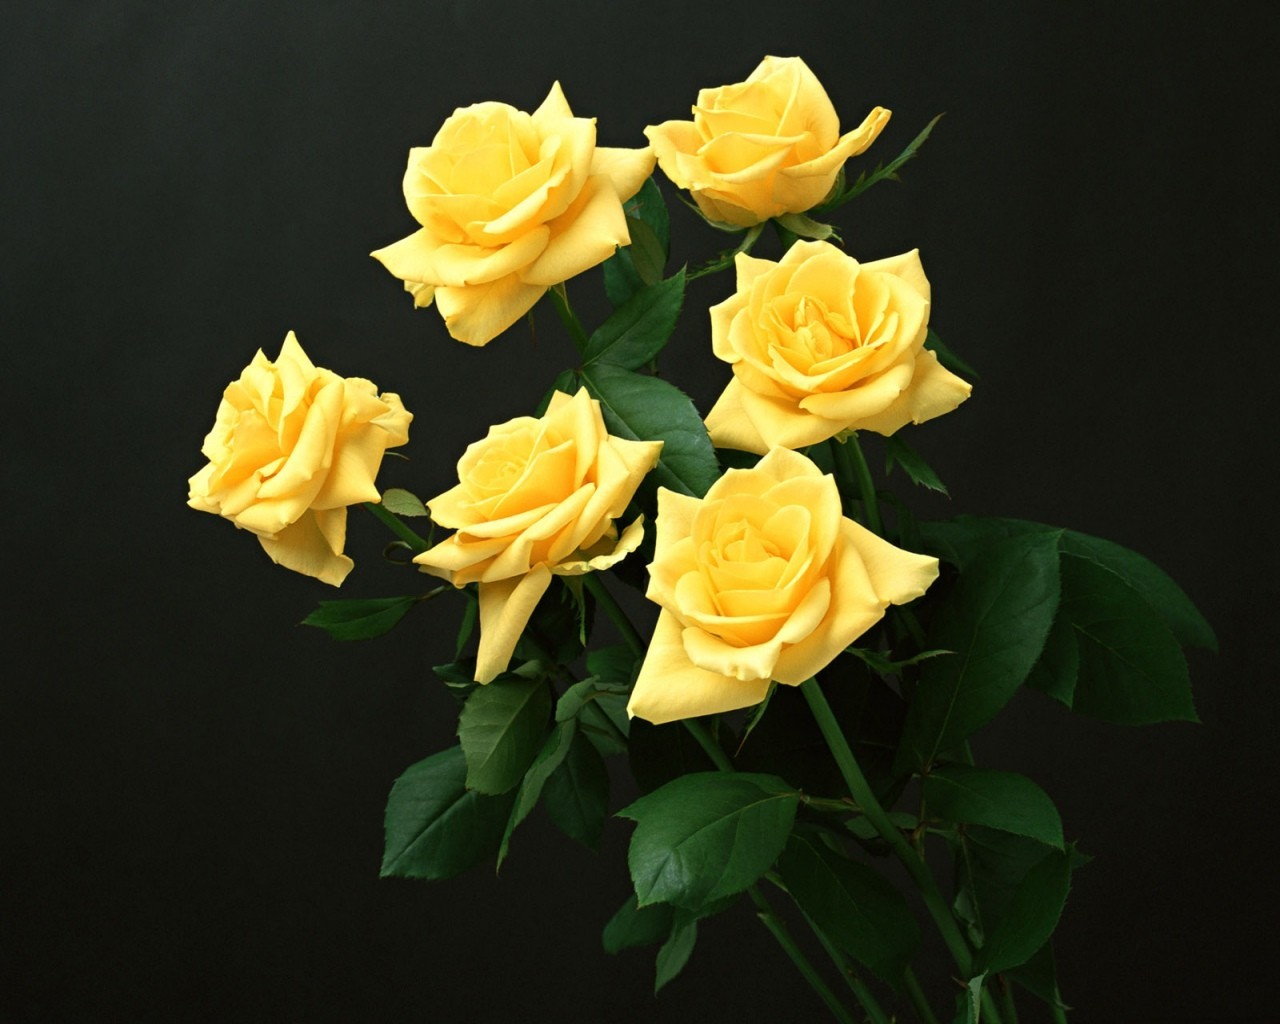 General 1280x1024 yellow flowers yellow roses plants flowers simple background